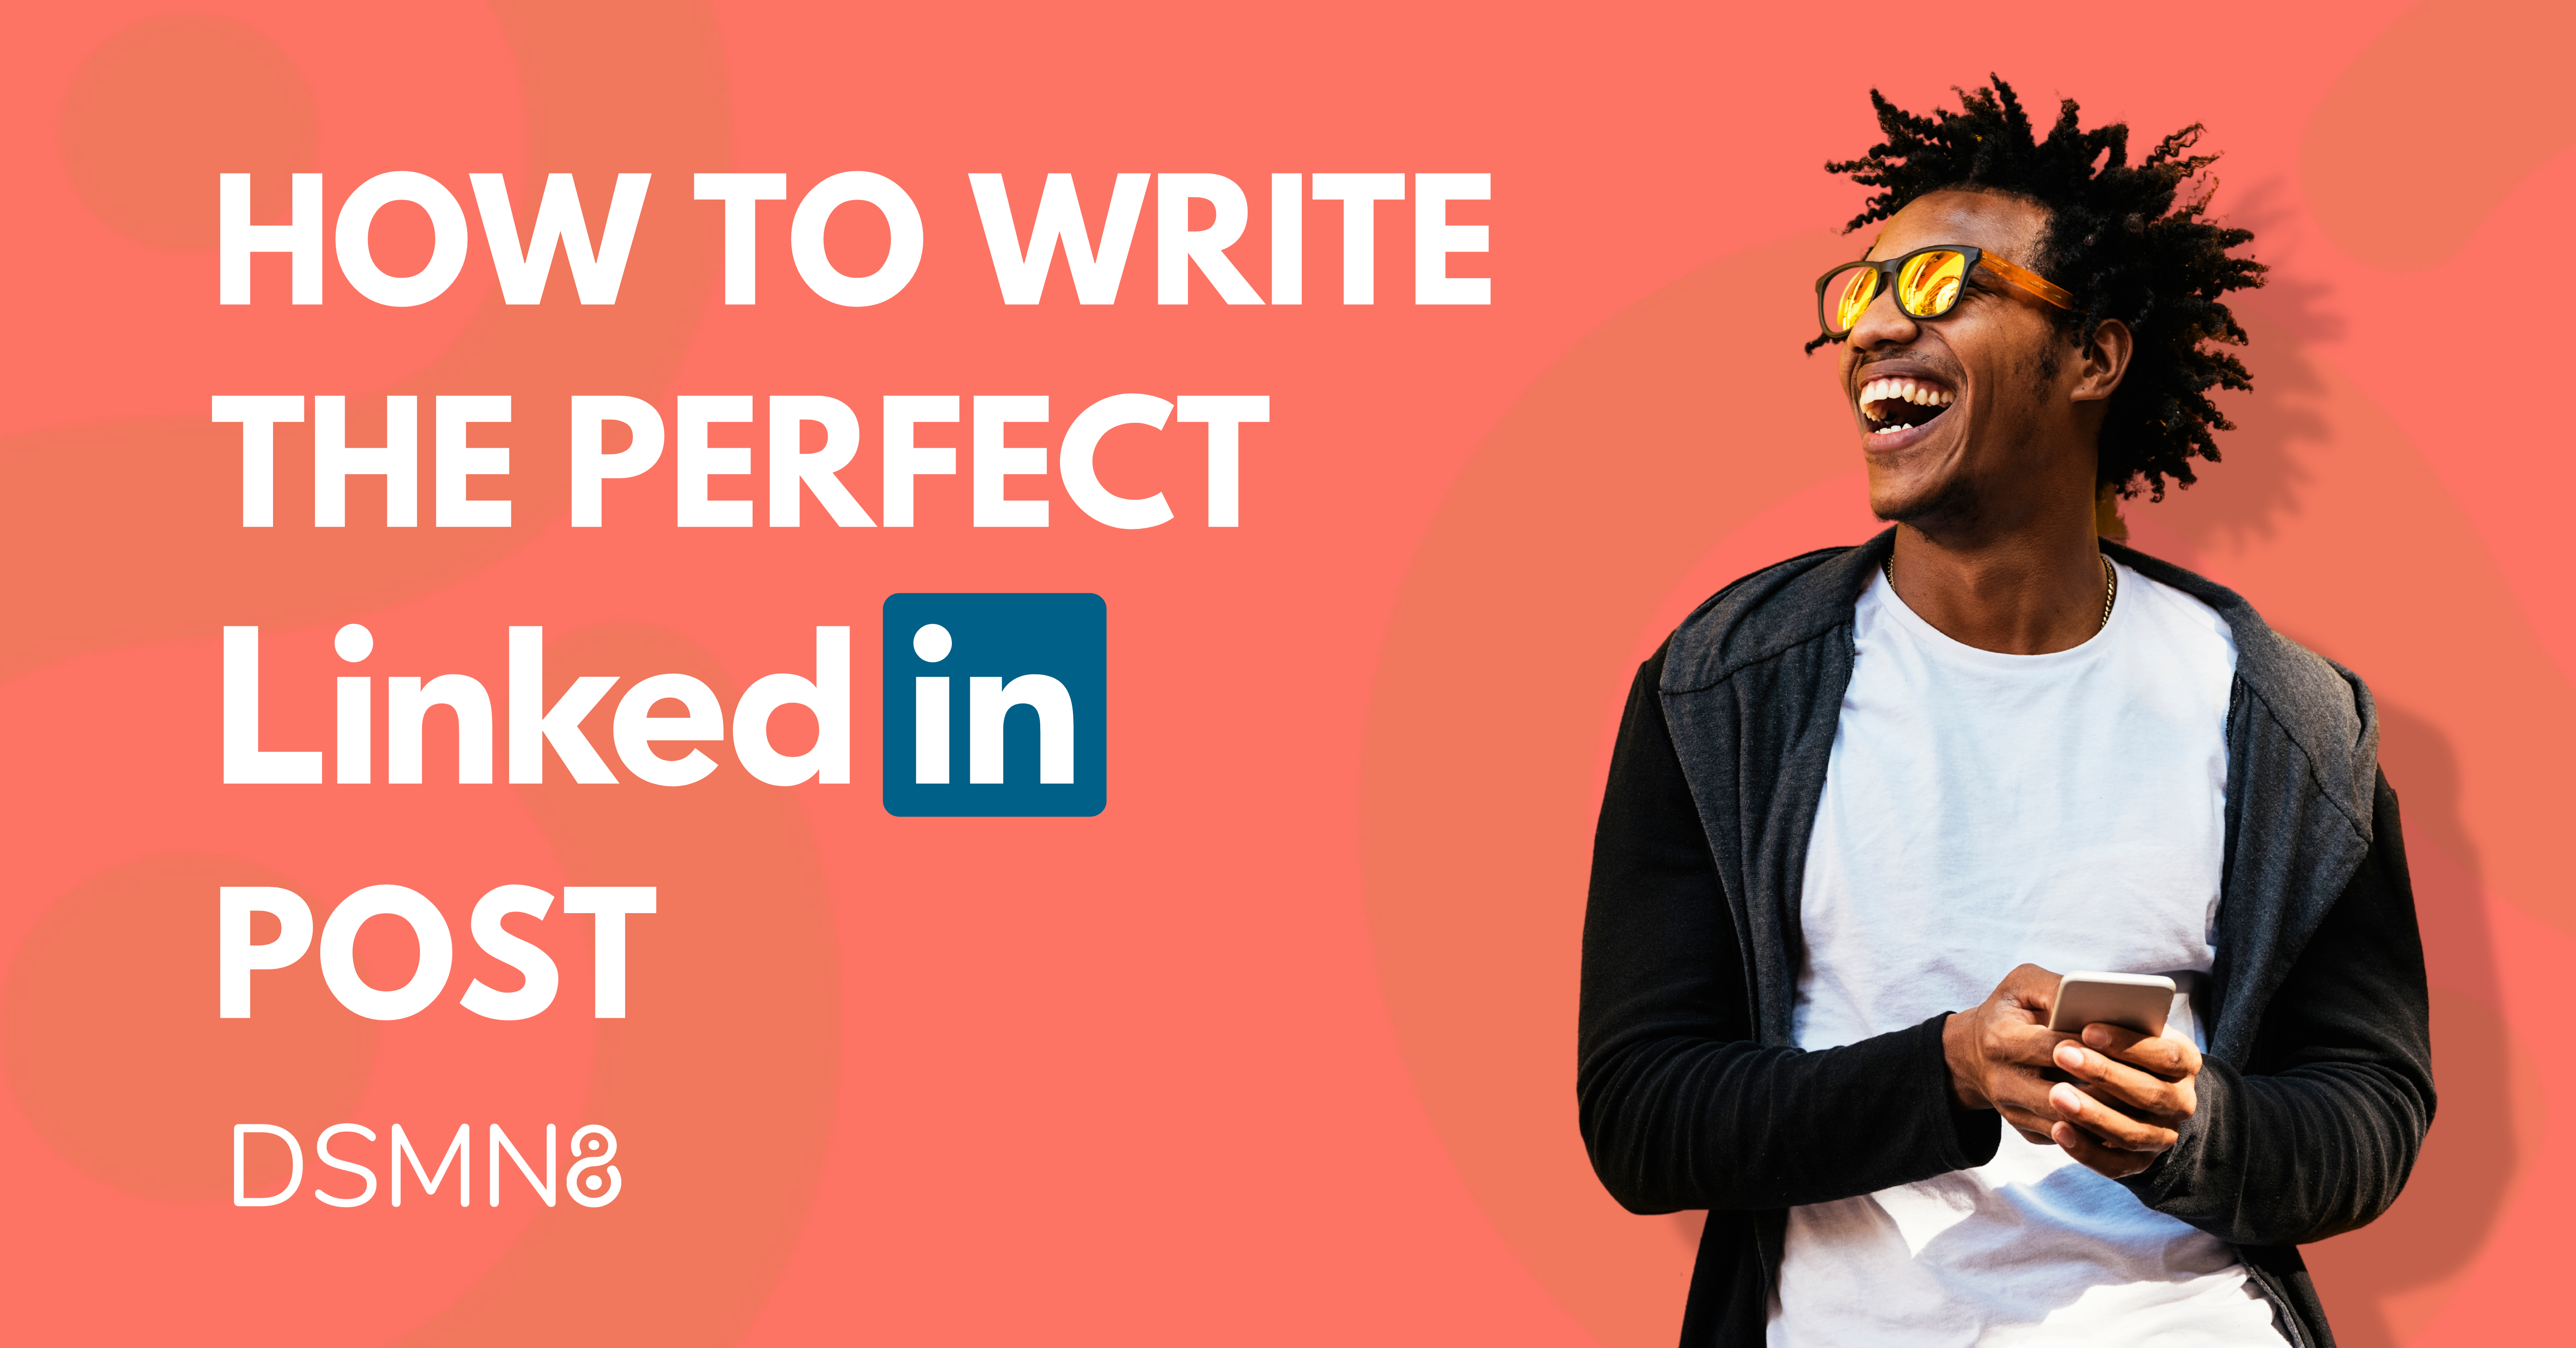 How to Write the Perfect LinkedIn Post- DSMN8